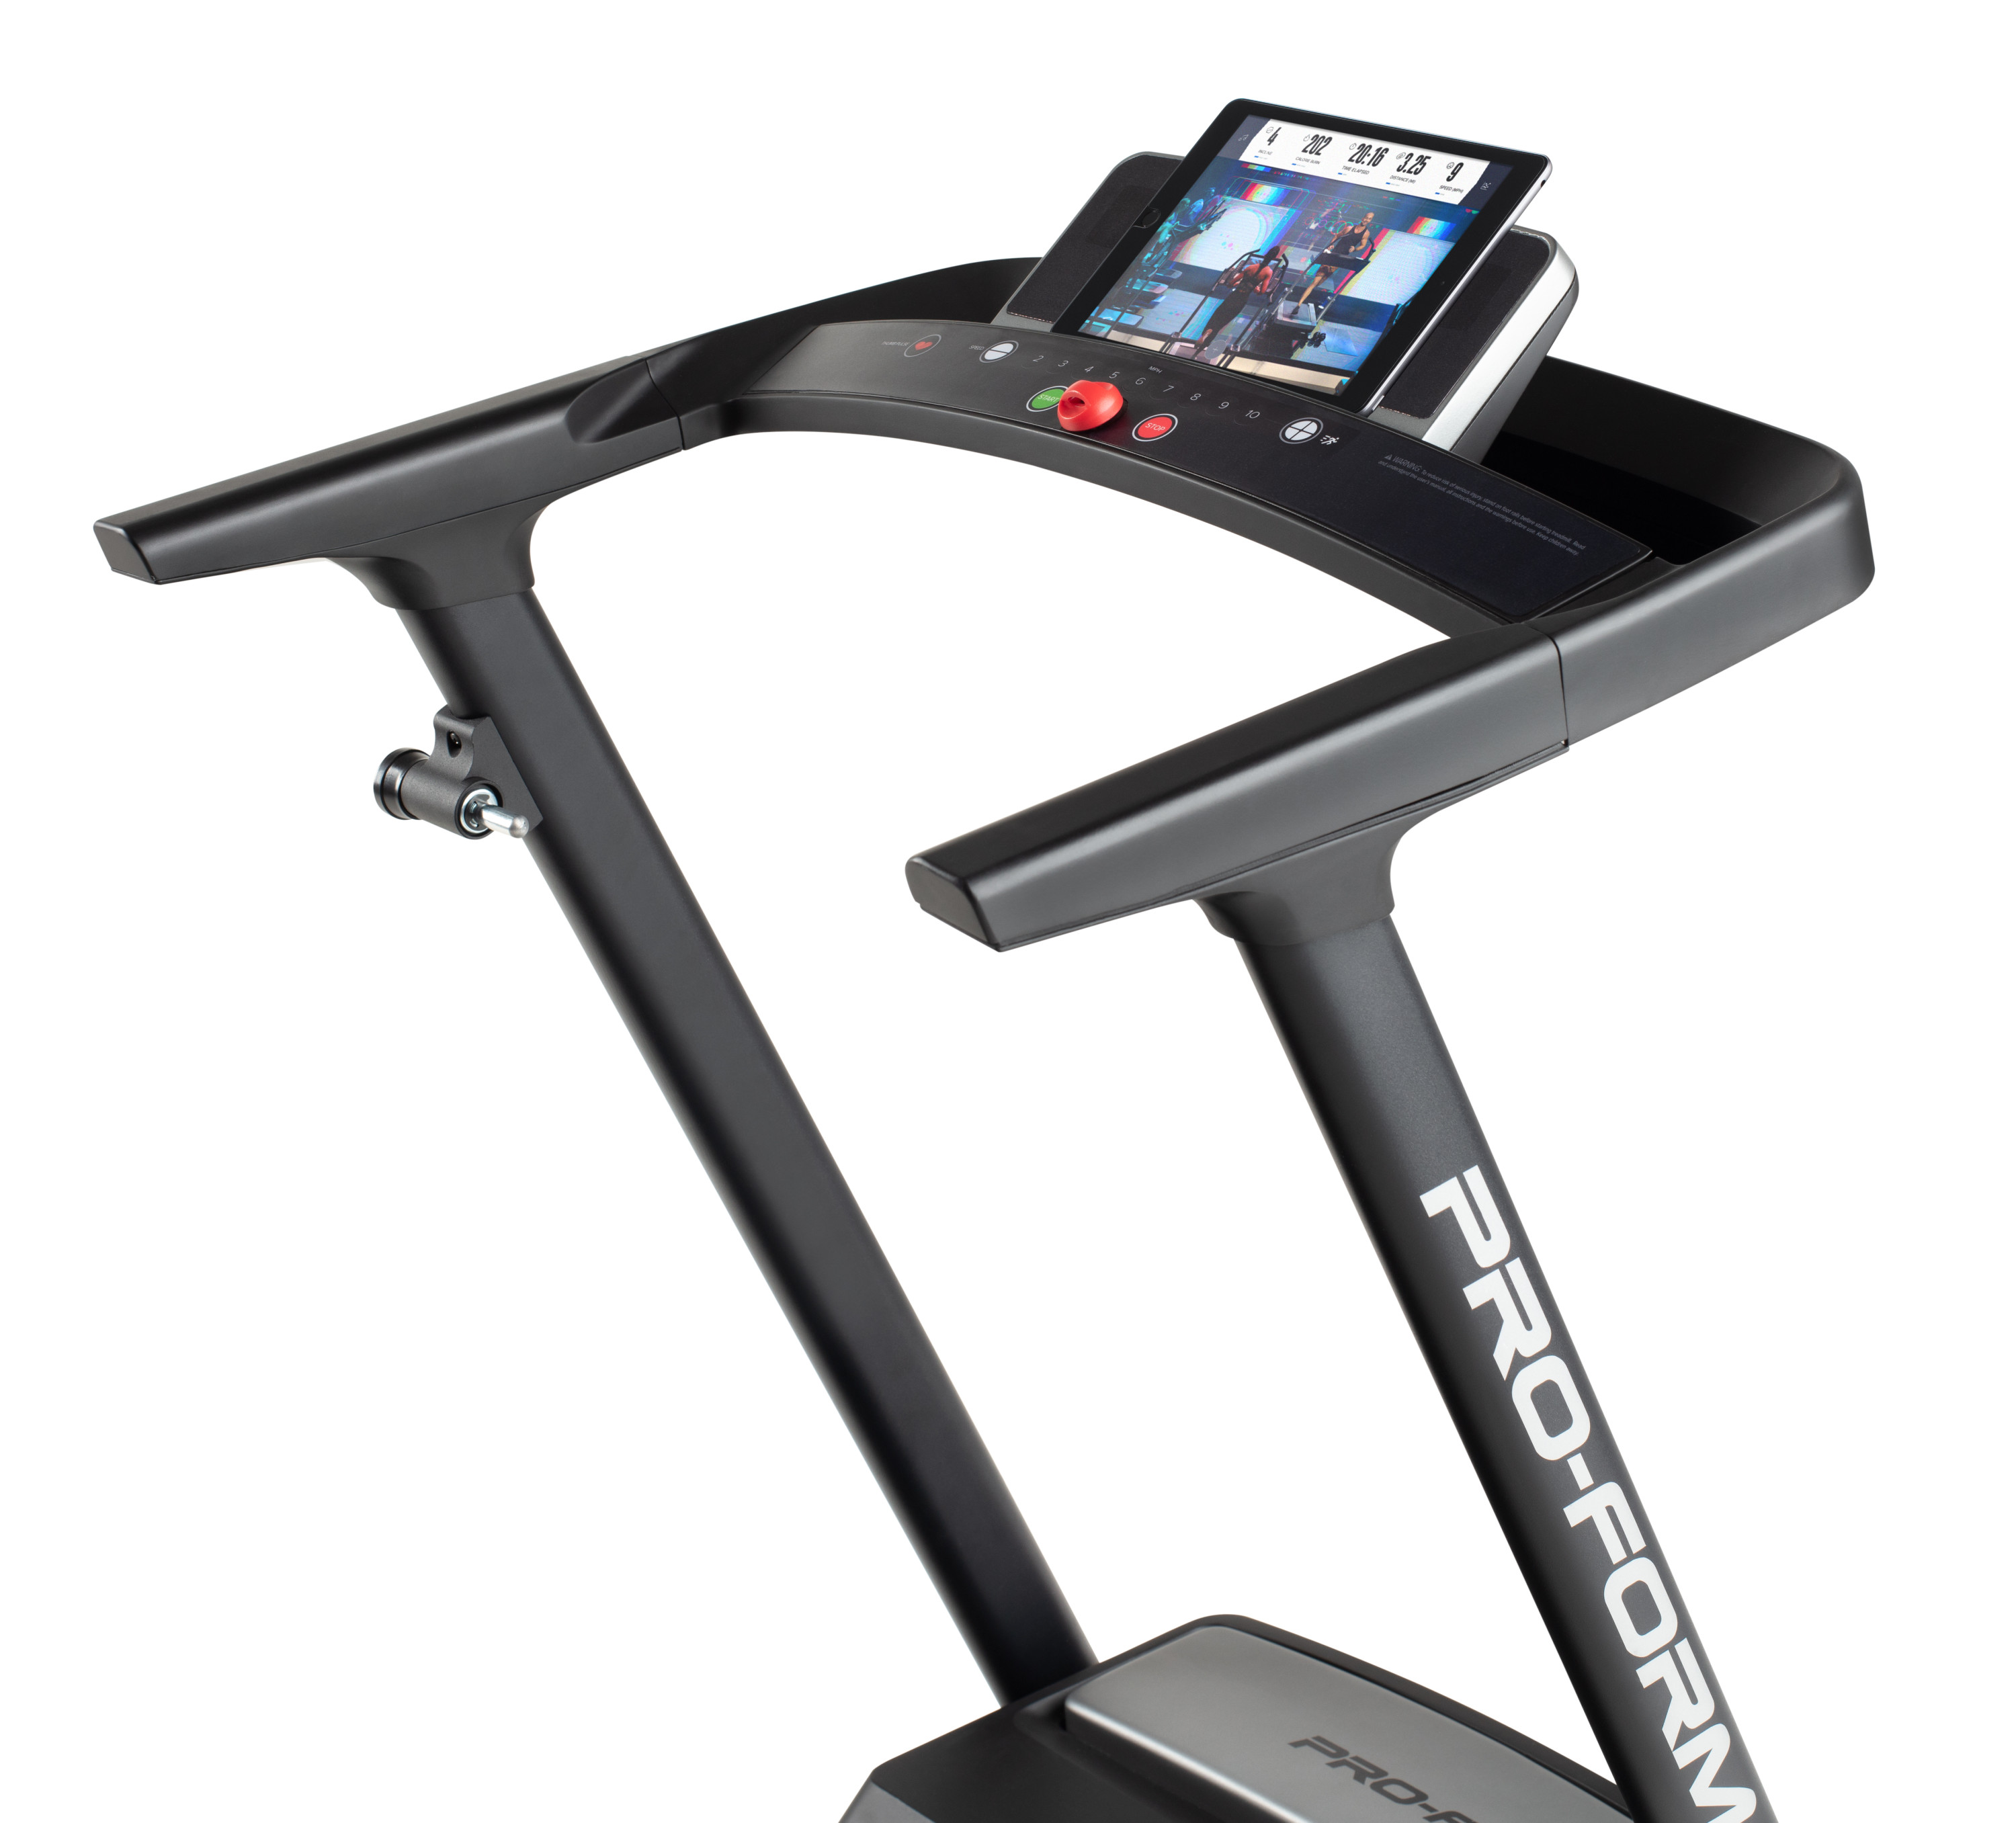 ProForm Cadence WLT Folding Treadmill with Reflex Deck for Walking and Jogging, iFit Bluetooth Enabled - image 13 of 31